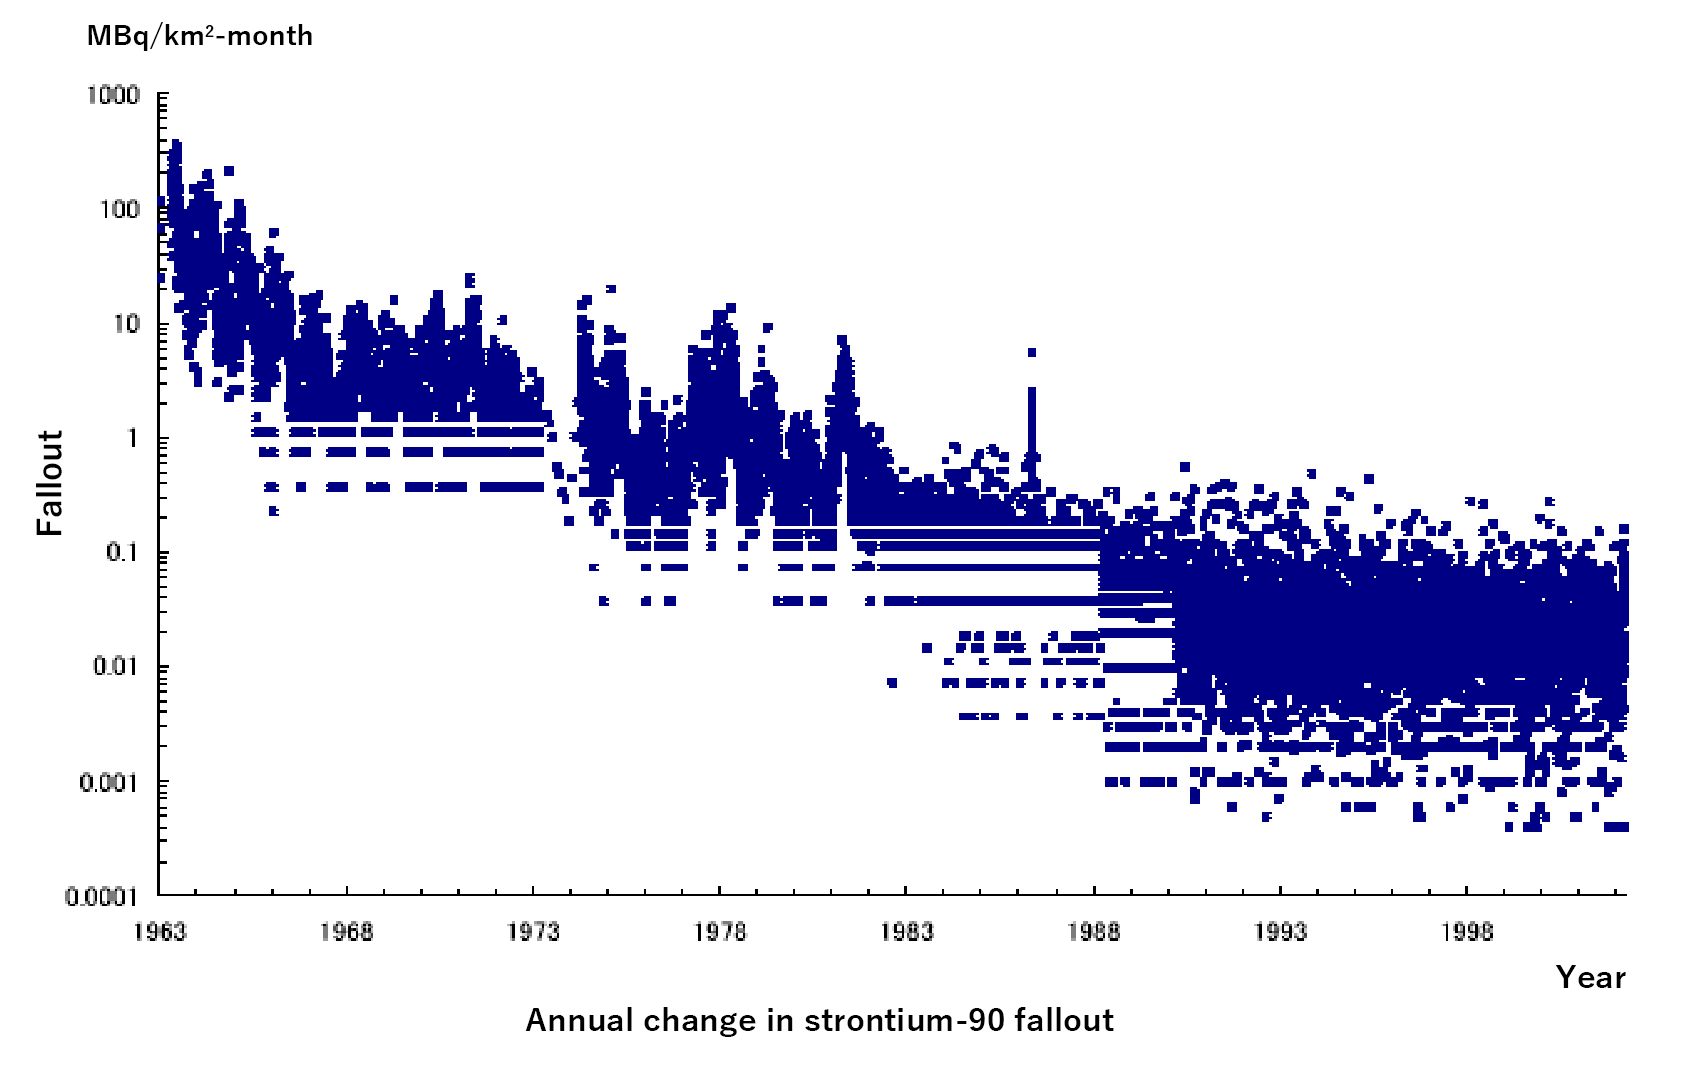 Annual change in strontium-90 fallout